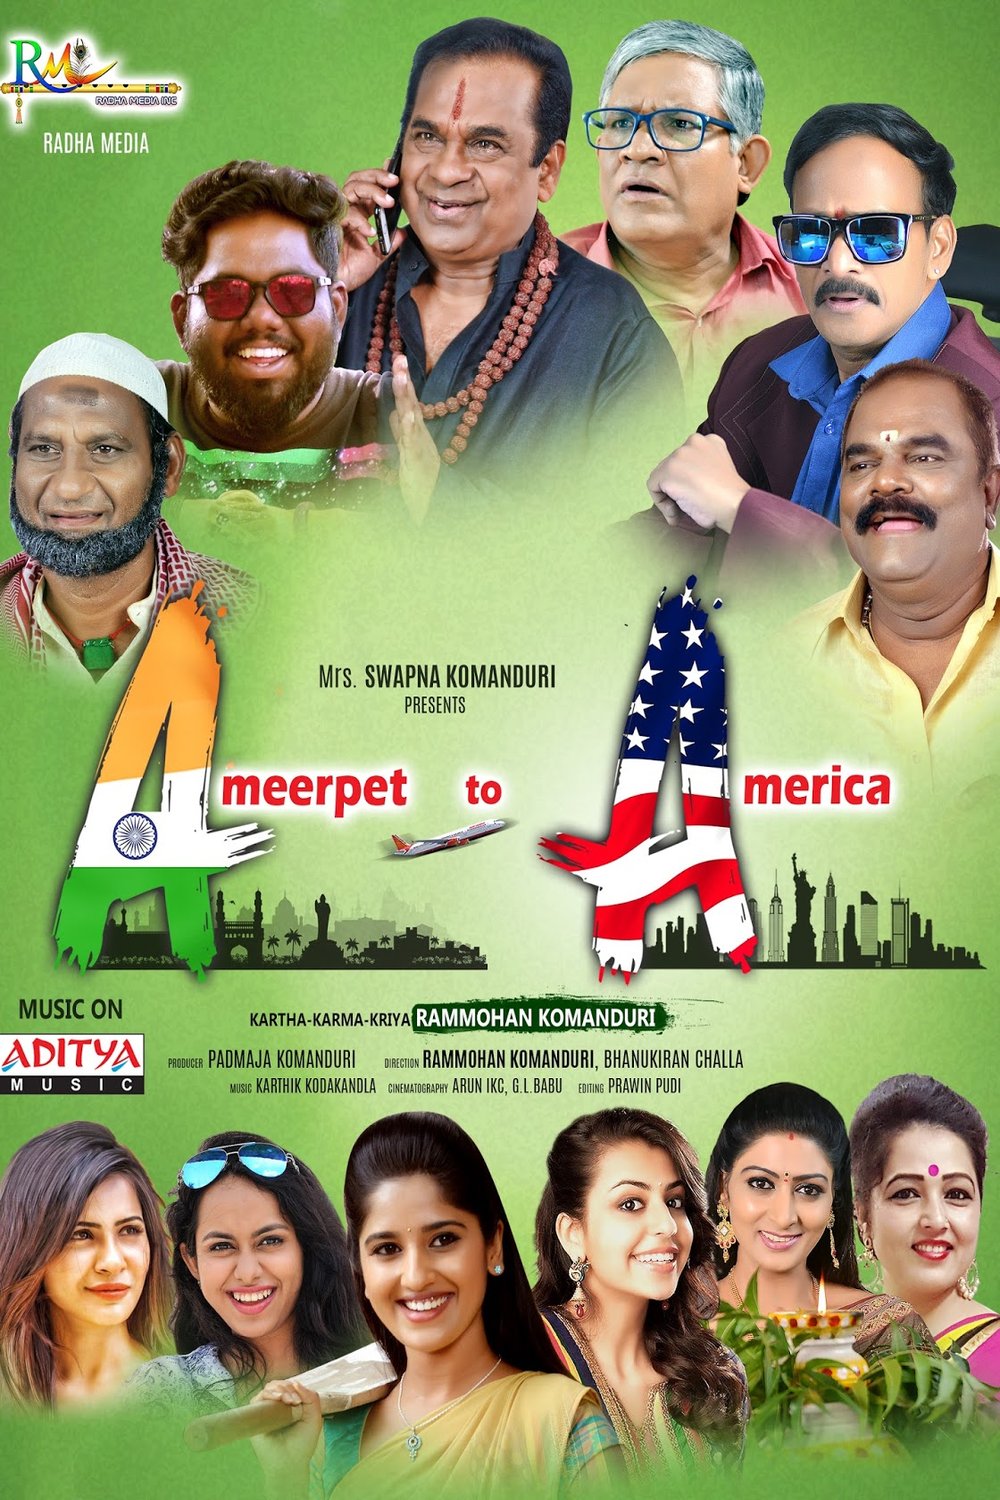 Poster of the movie Ameerpet 2 America